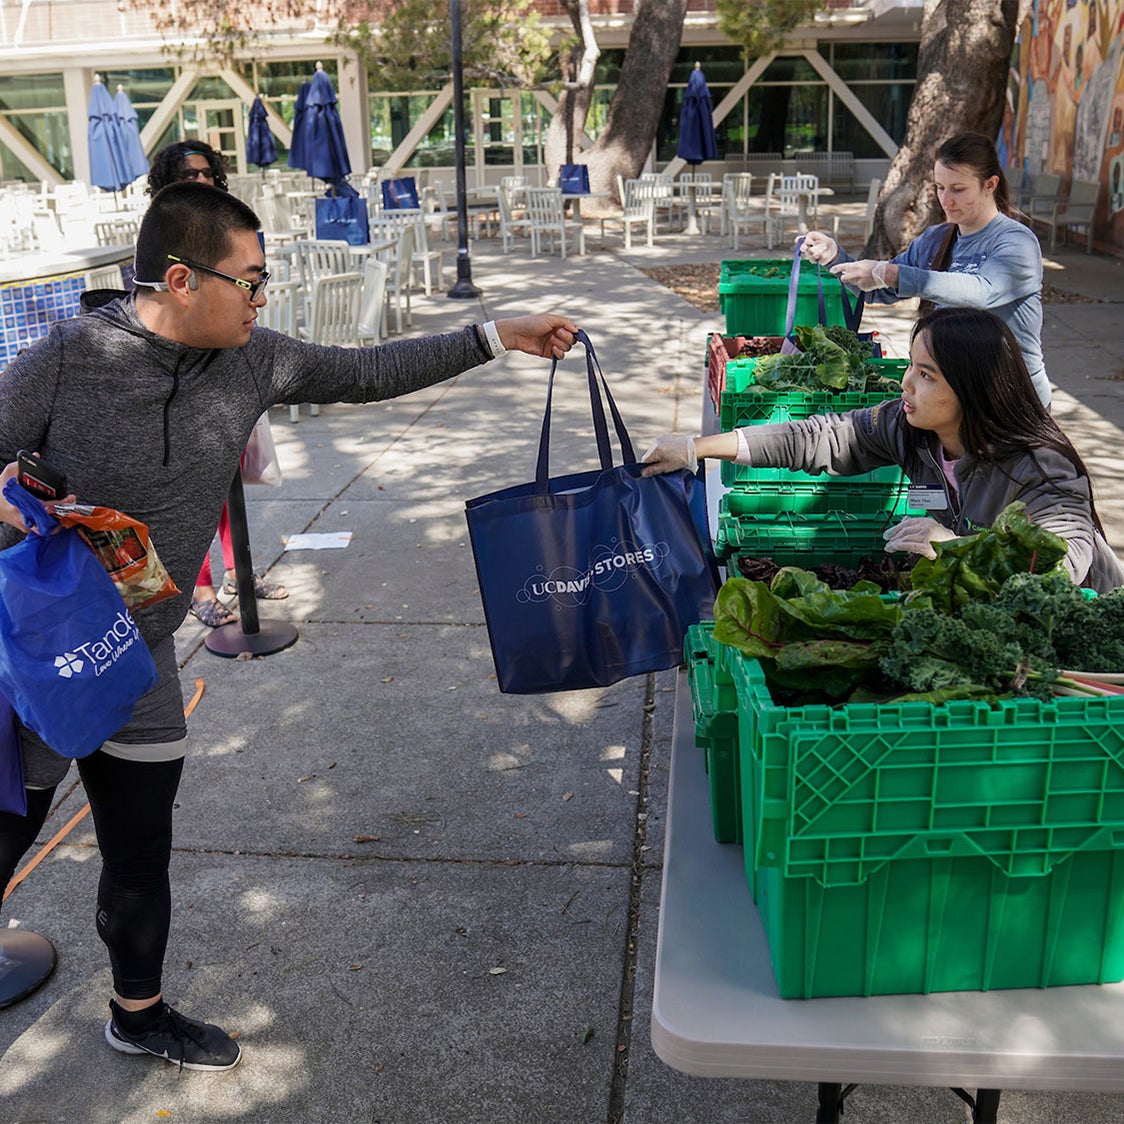 Student hands a bag of produce to another student outside the Memorial Union